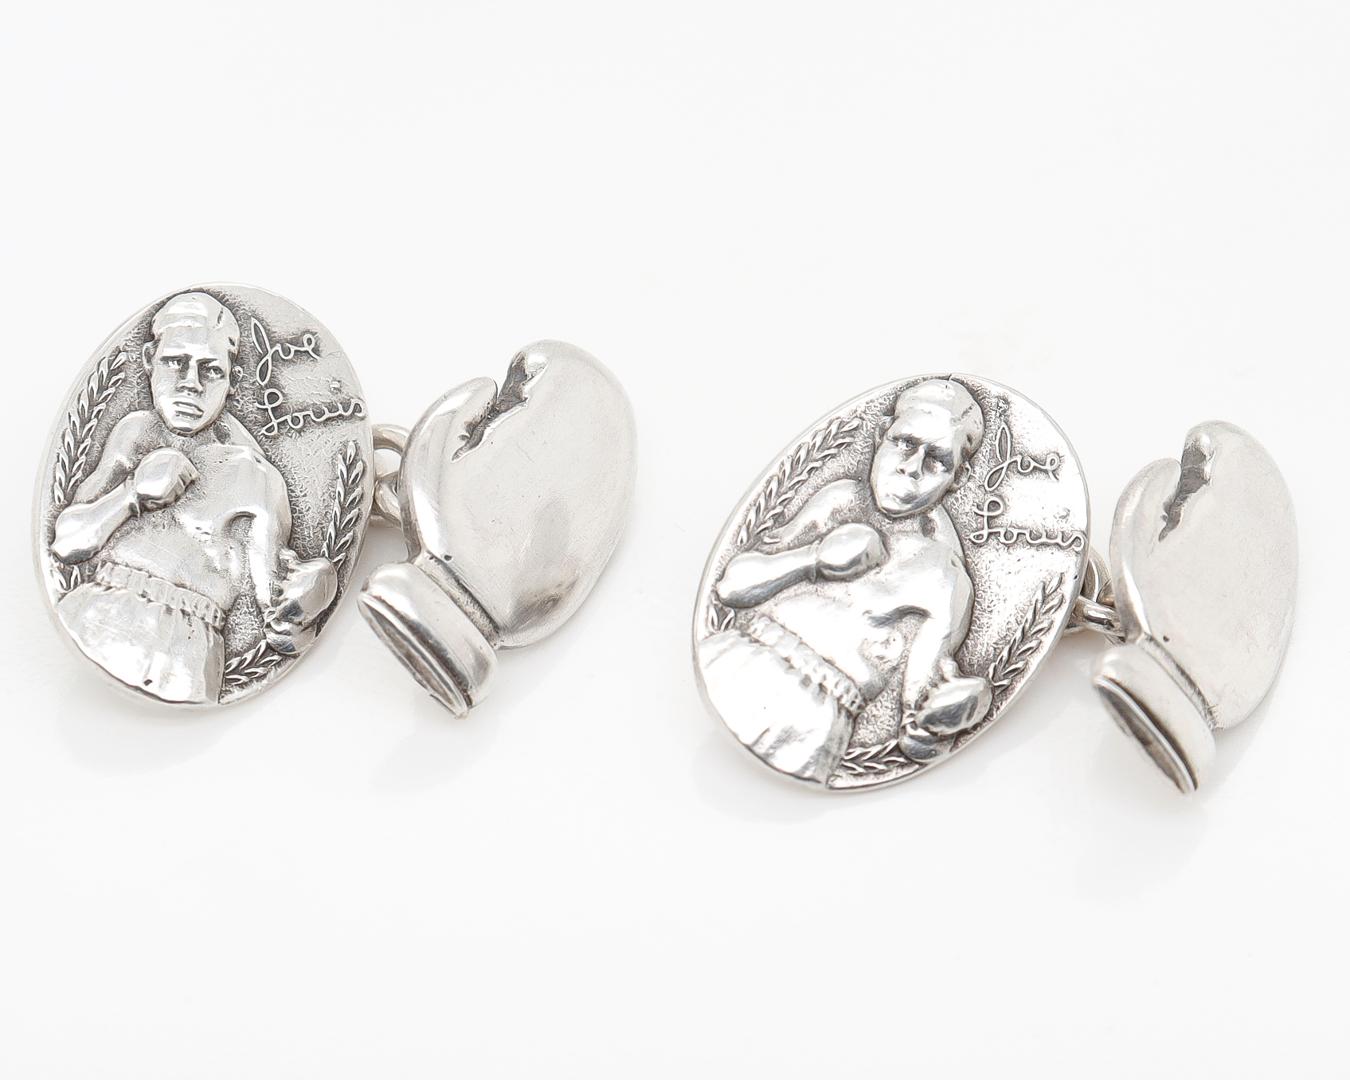 A fine pair of vintage pugilist-themed cufflinks.

In sterling silver.

With an embossed figural depiction of Joe Lewis to one side and boxing glove back. Each connected by a link chain. 

Marked Sterling to the reverse.

Simply terrific Mid-Century